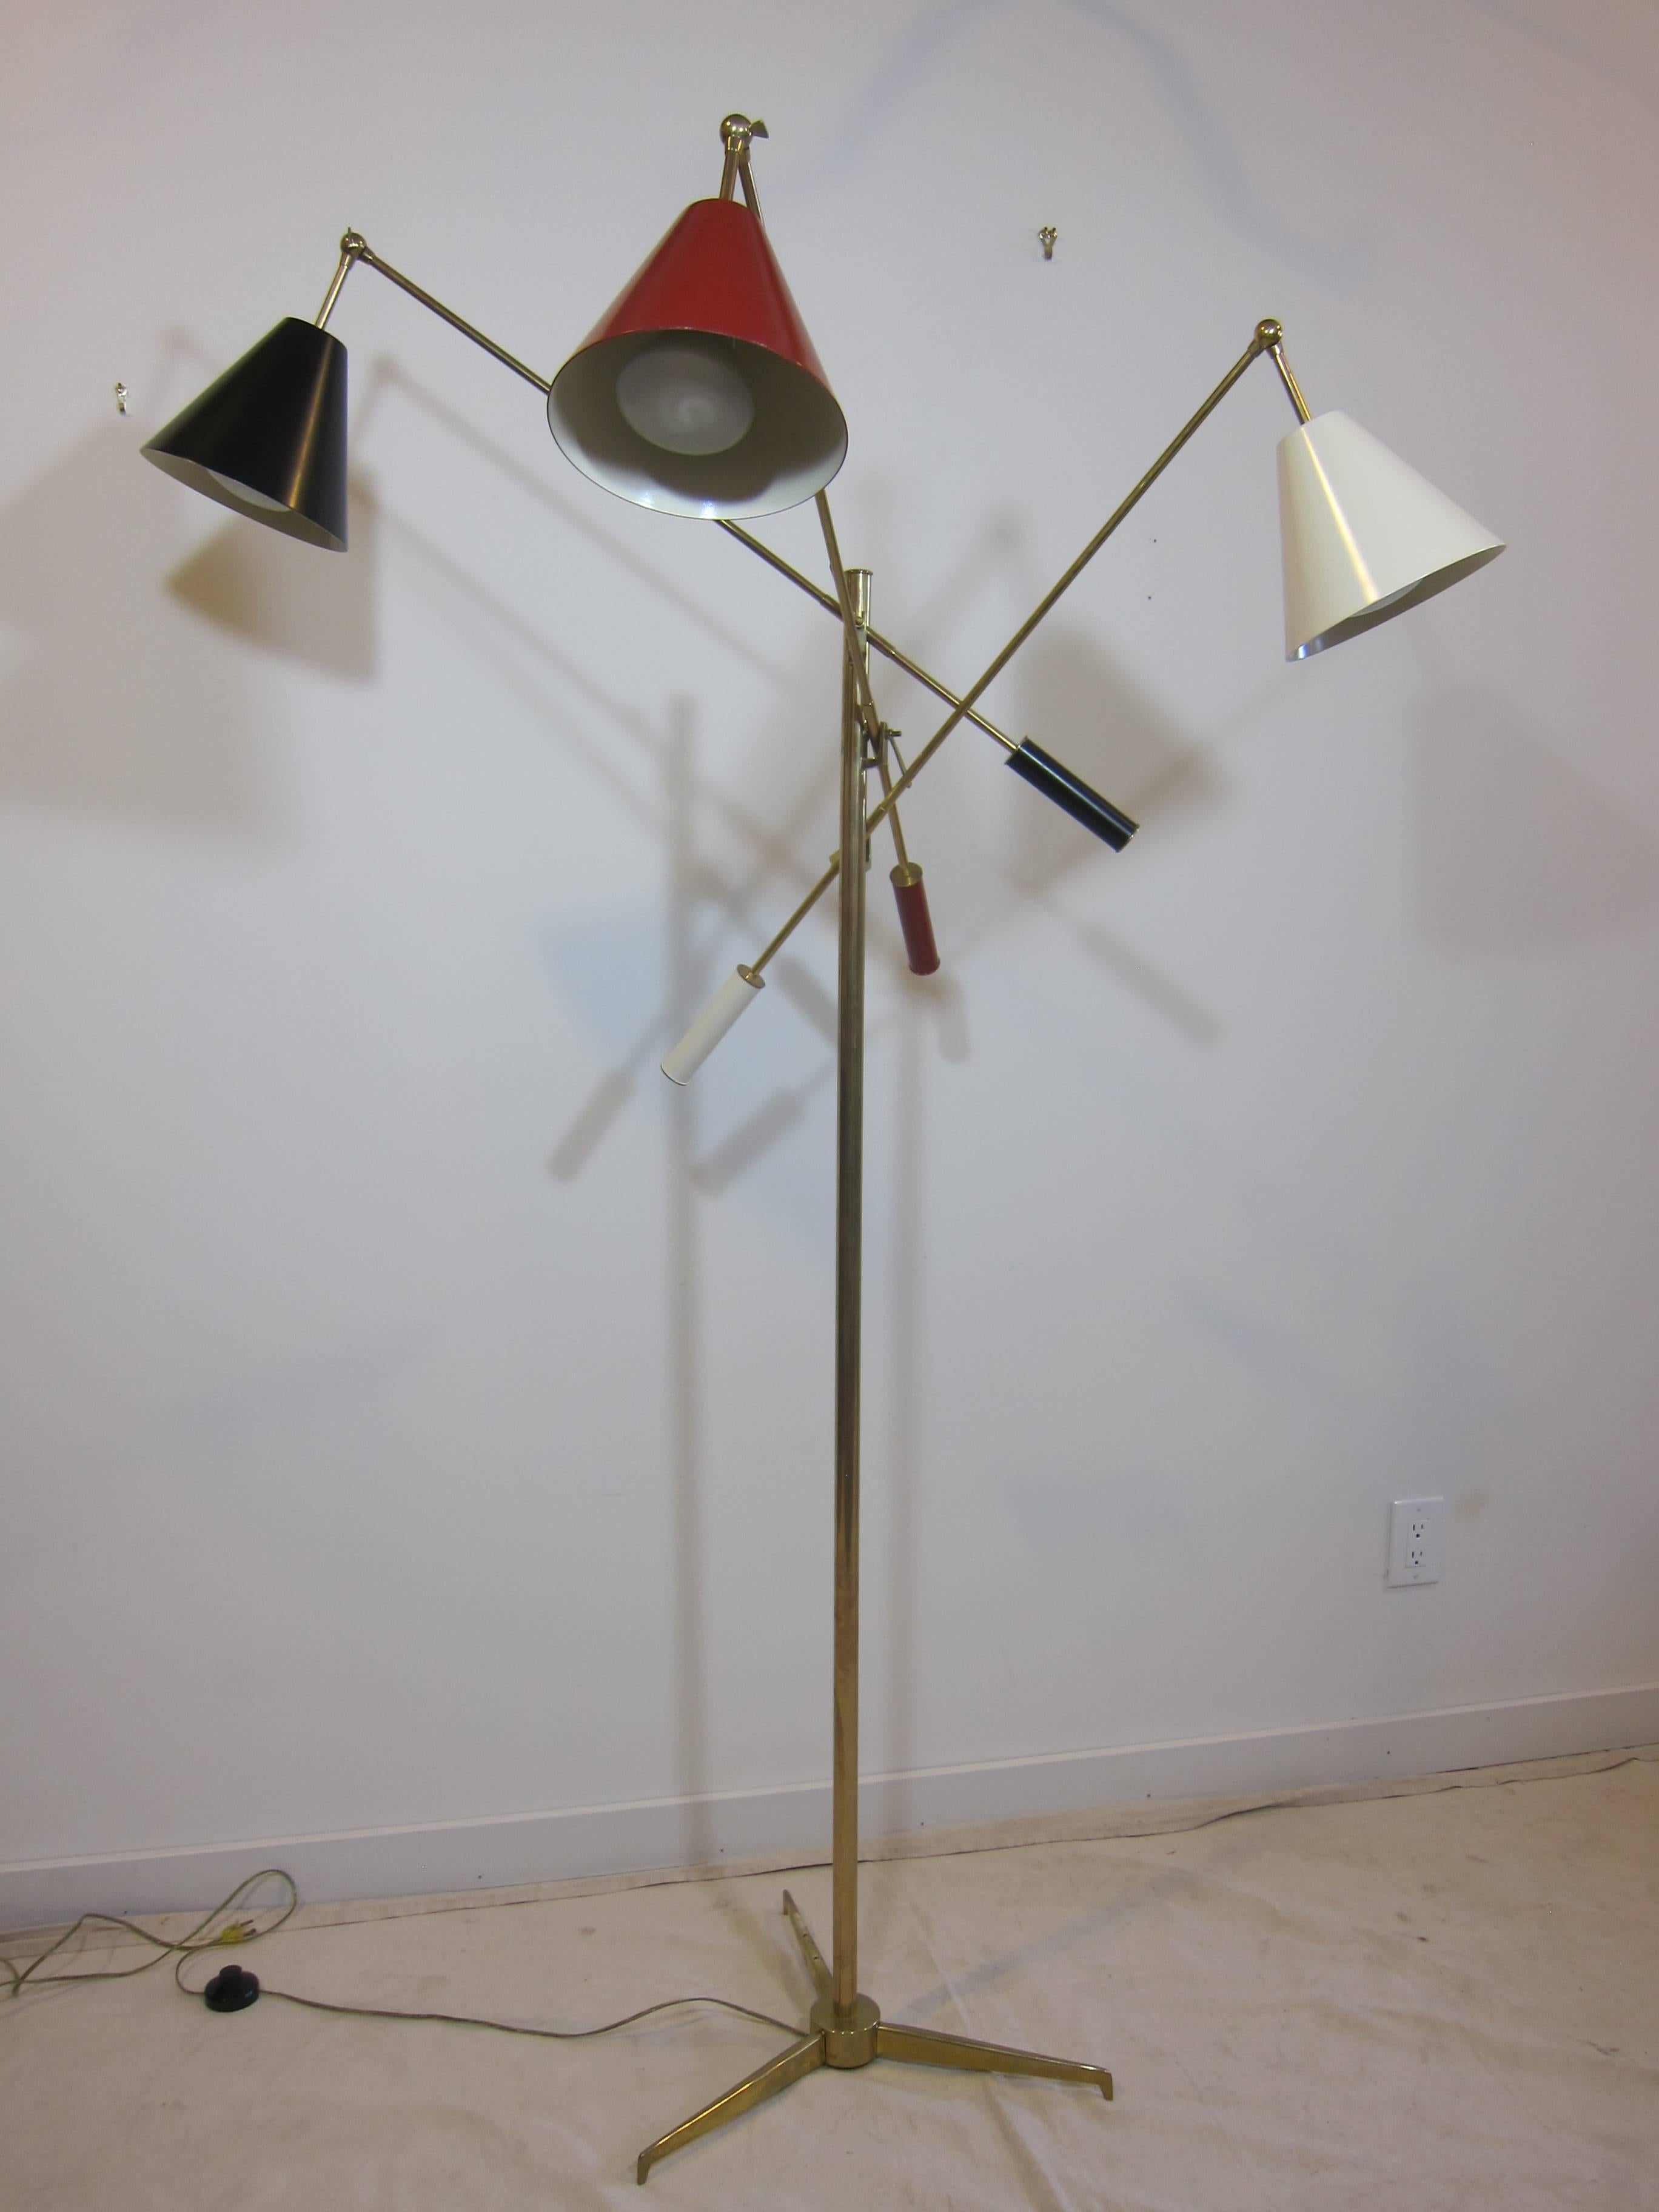 Arredoluce Triennale brass floor lamp. Shades are in black, red, and white with brass rods to counterbalance handles. On off switch on the cord. Marked AL. Designed by Angelo Lelli for Arredoluce, Monza. New wiring. Very good condition.